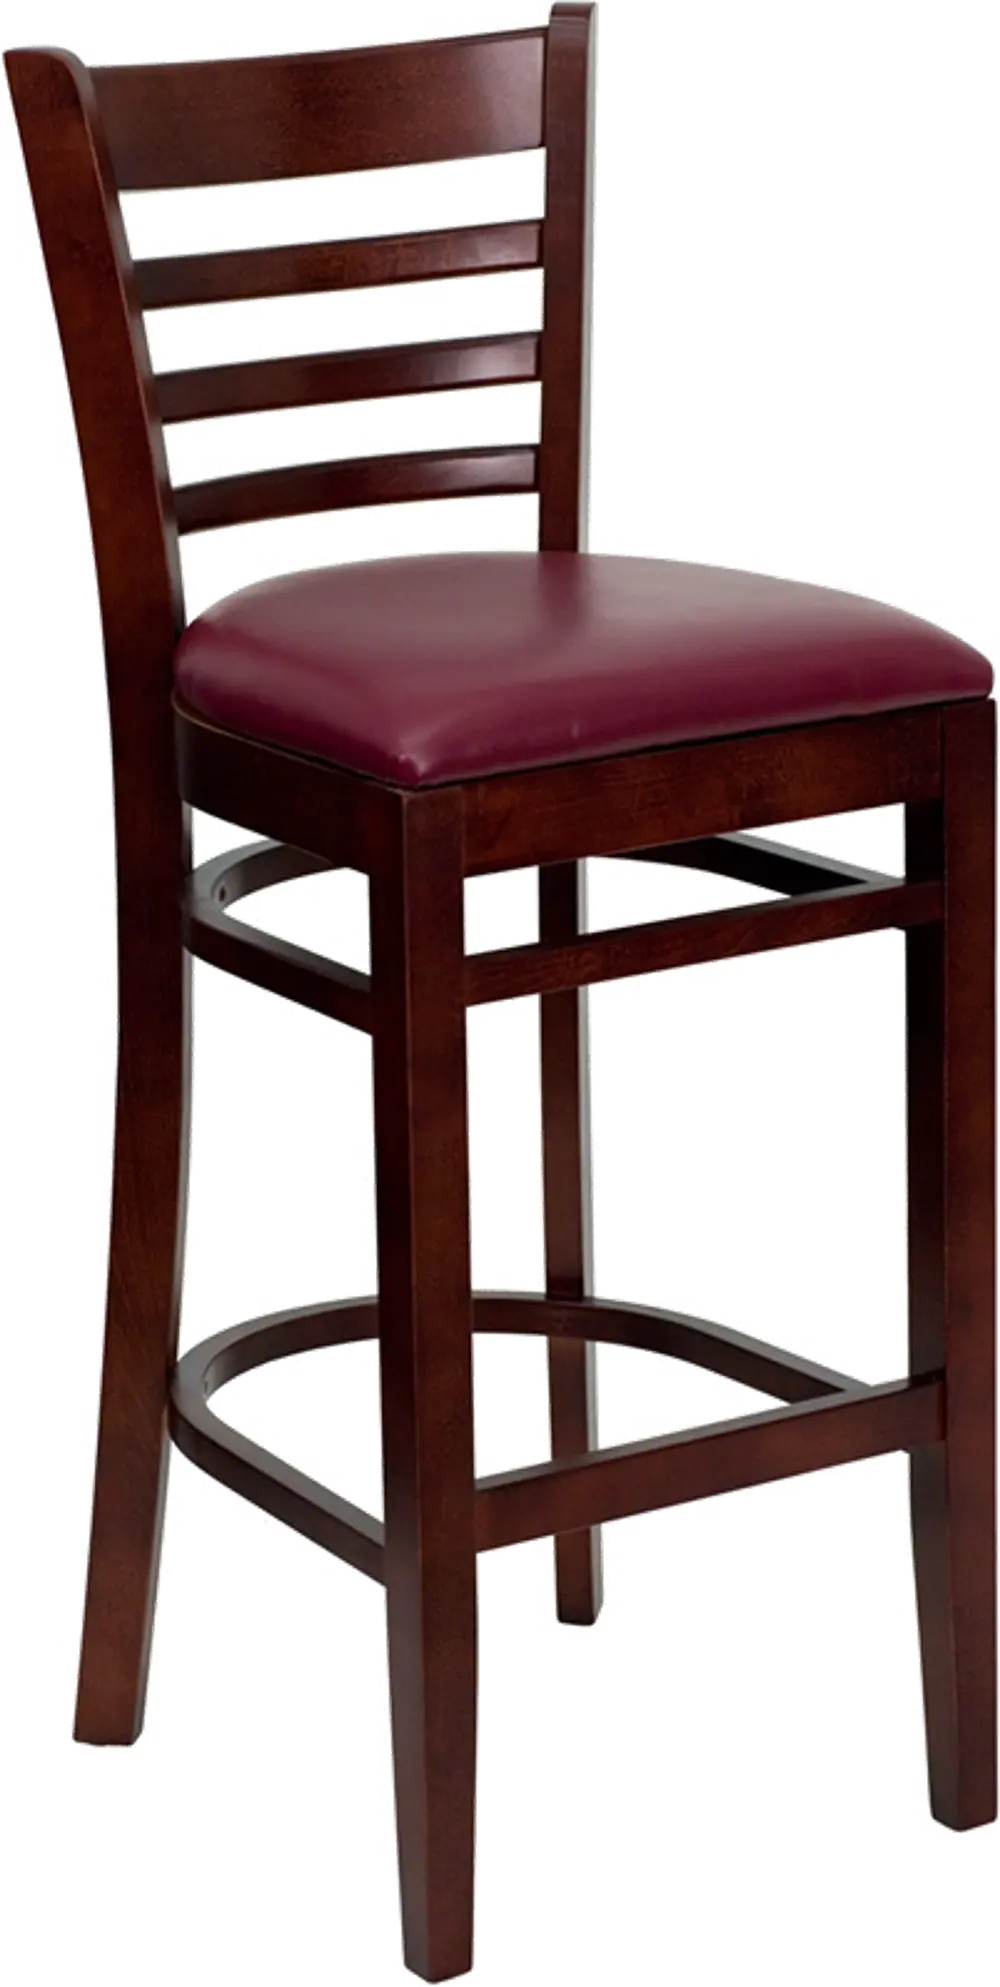 Brown and Burgundy Upholstered Commercial Bar Stool - Ladderback-1